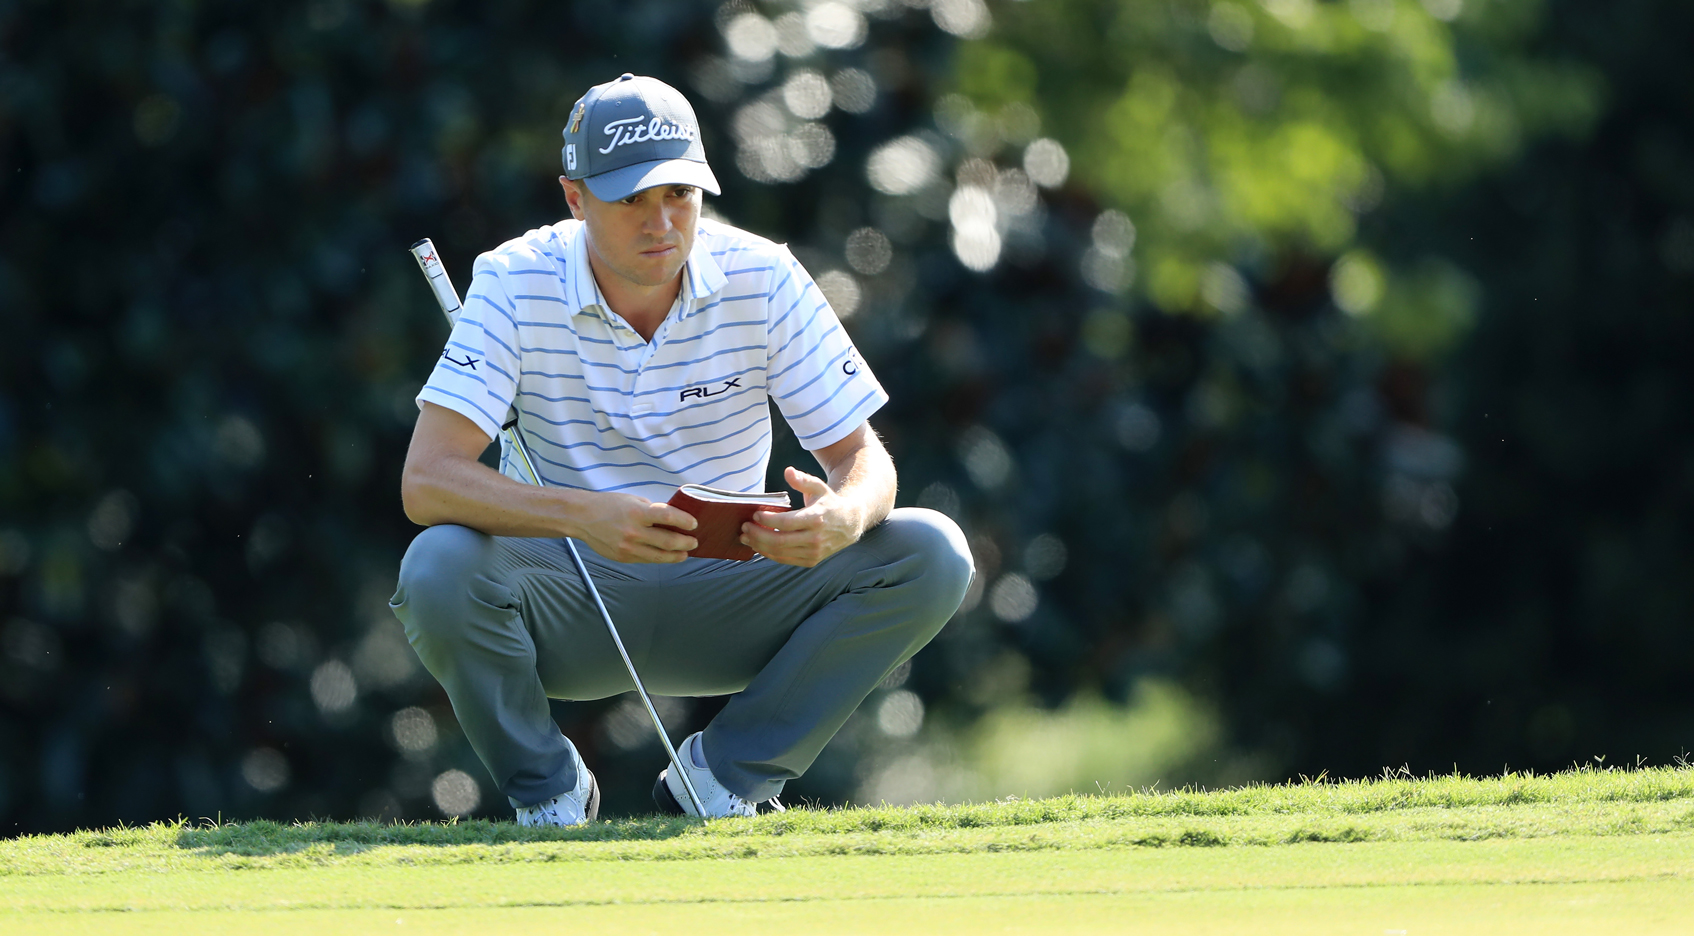 Justin Thomas ties personal record to remain in second at East Lake